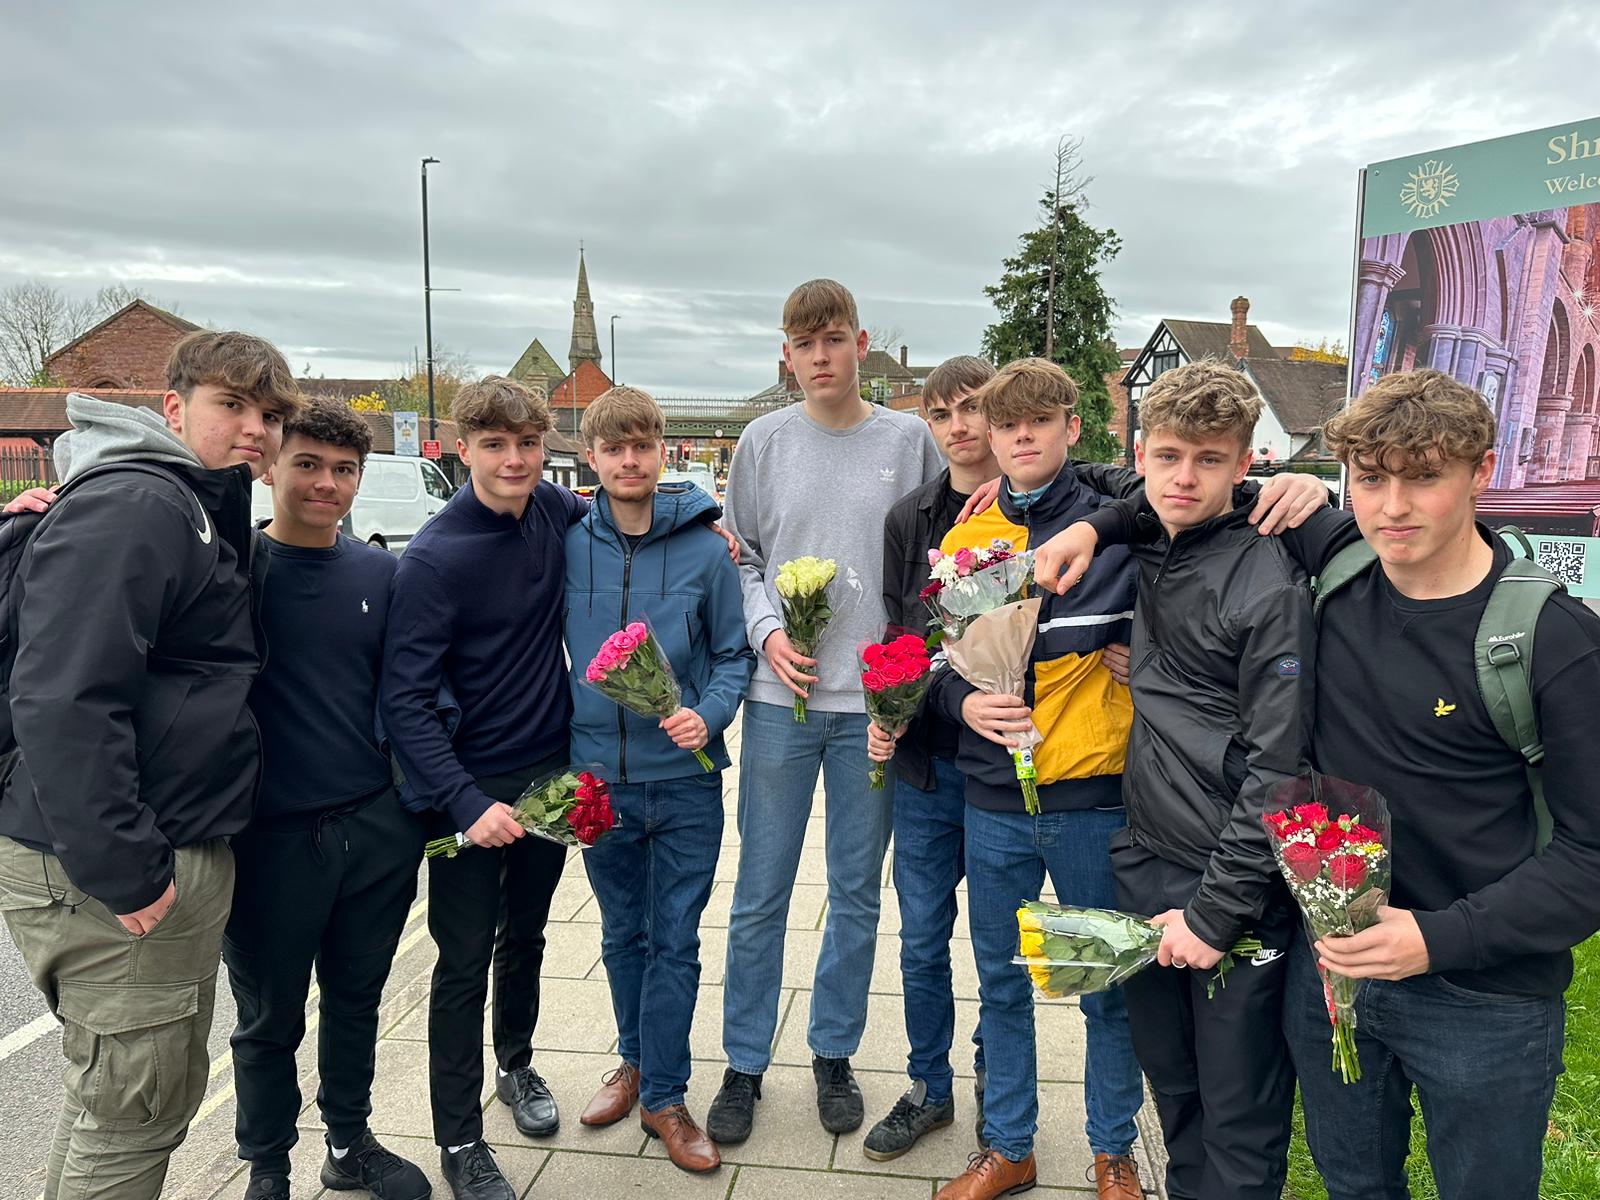 Friends of the four teenagers paid their respects at Shrewsbury Abbey on the day after their bodies were found